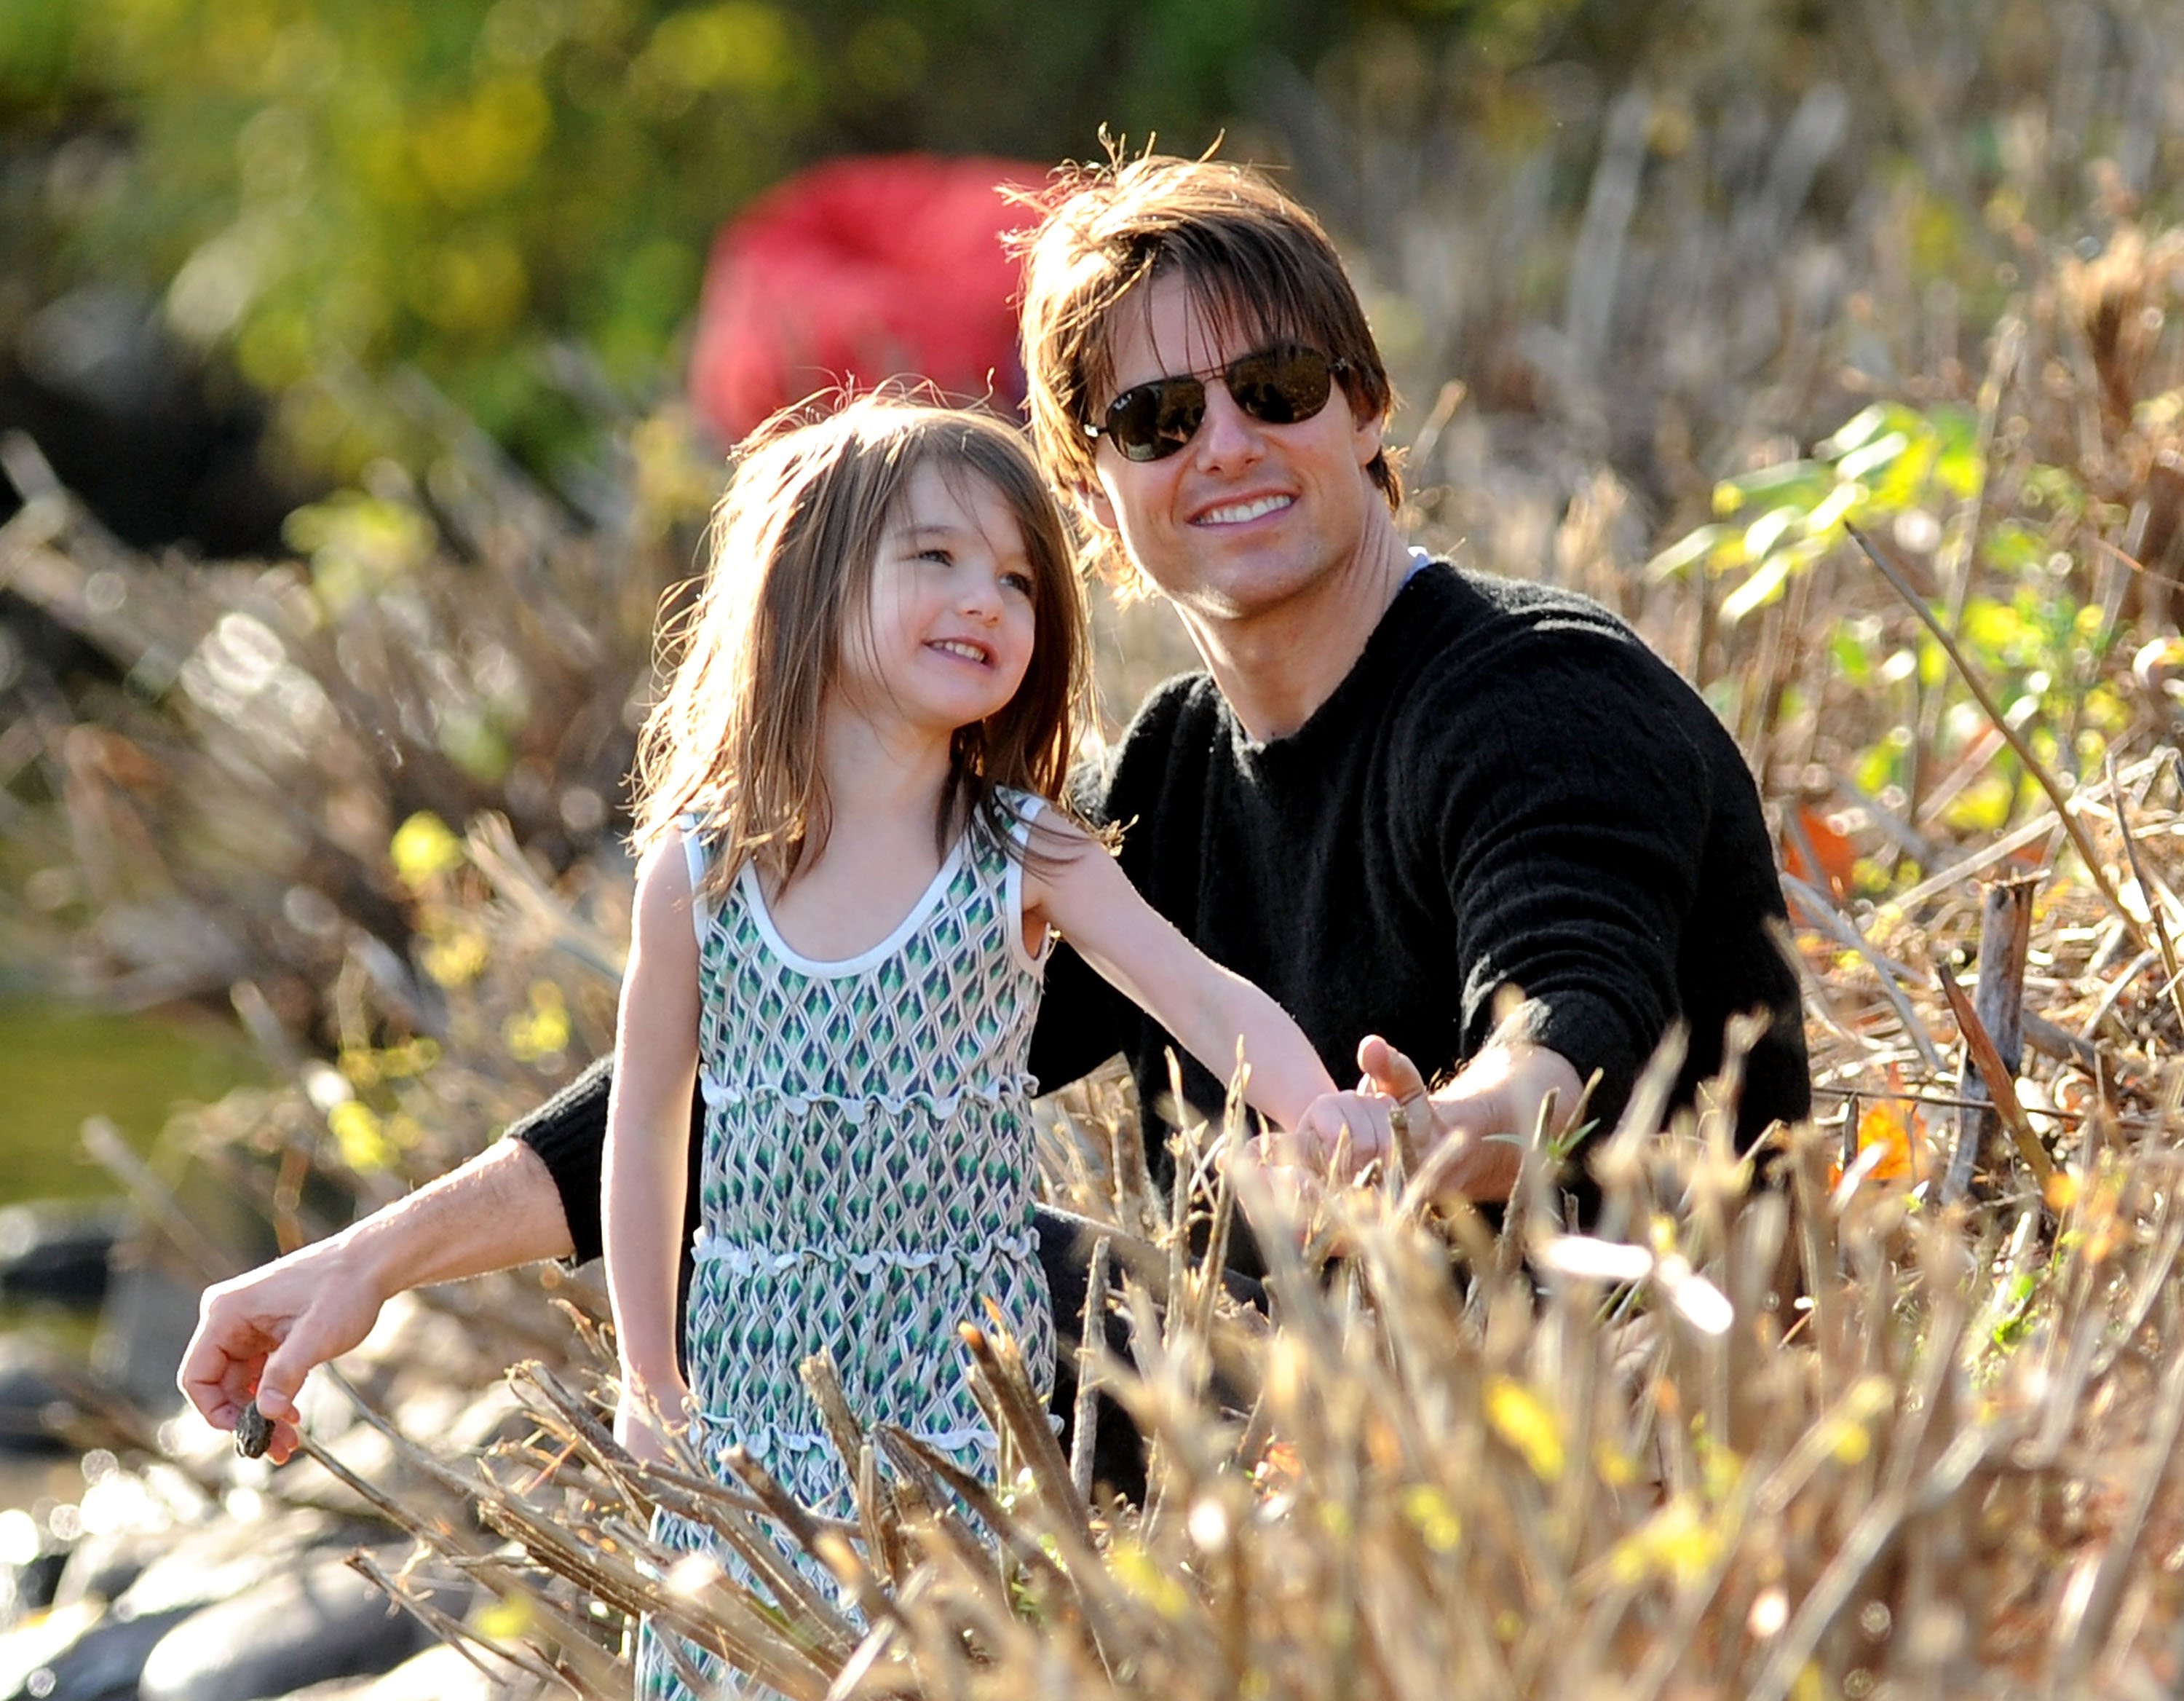 Suri Cruise and Tom Cruise visit Charles River Basin on October 10, 2009 in Cambridge, Massachusetts. | Source: Getty Images